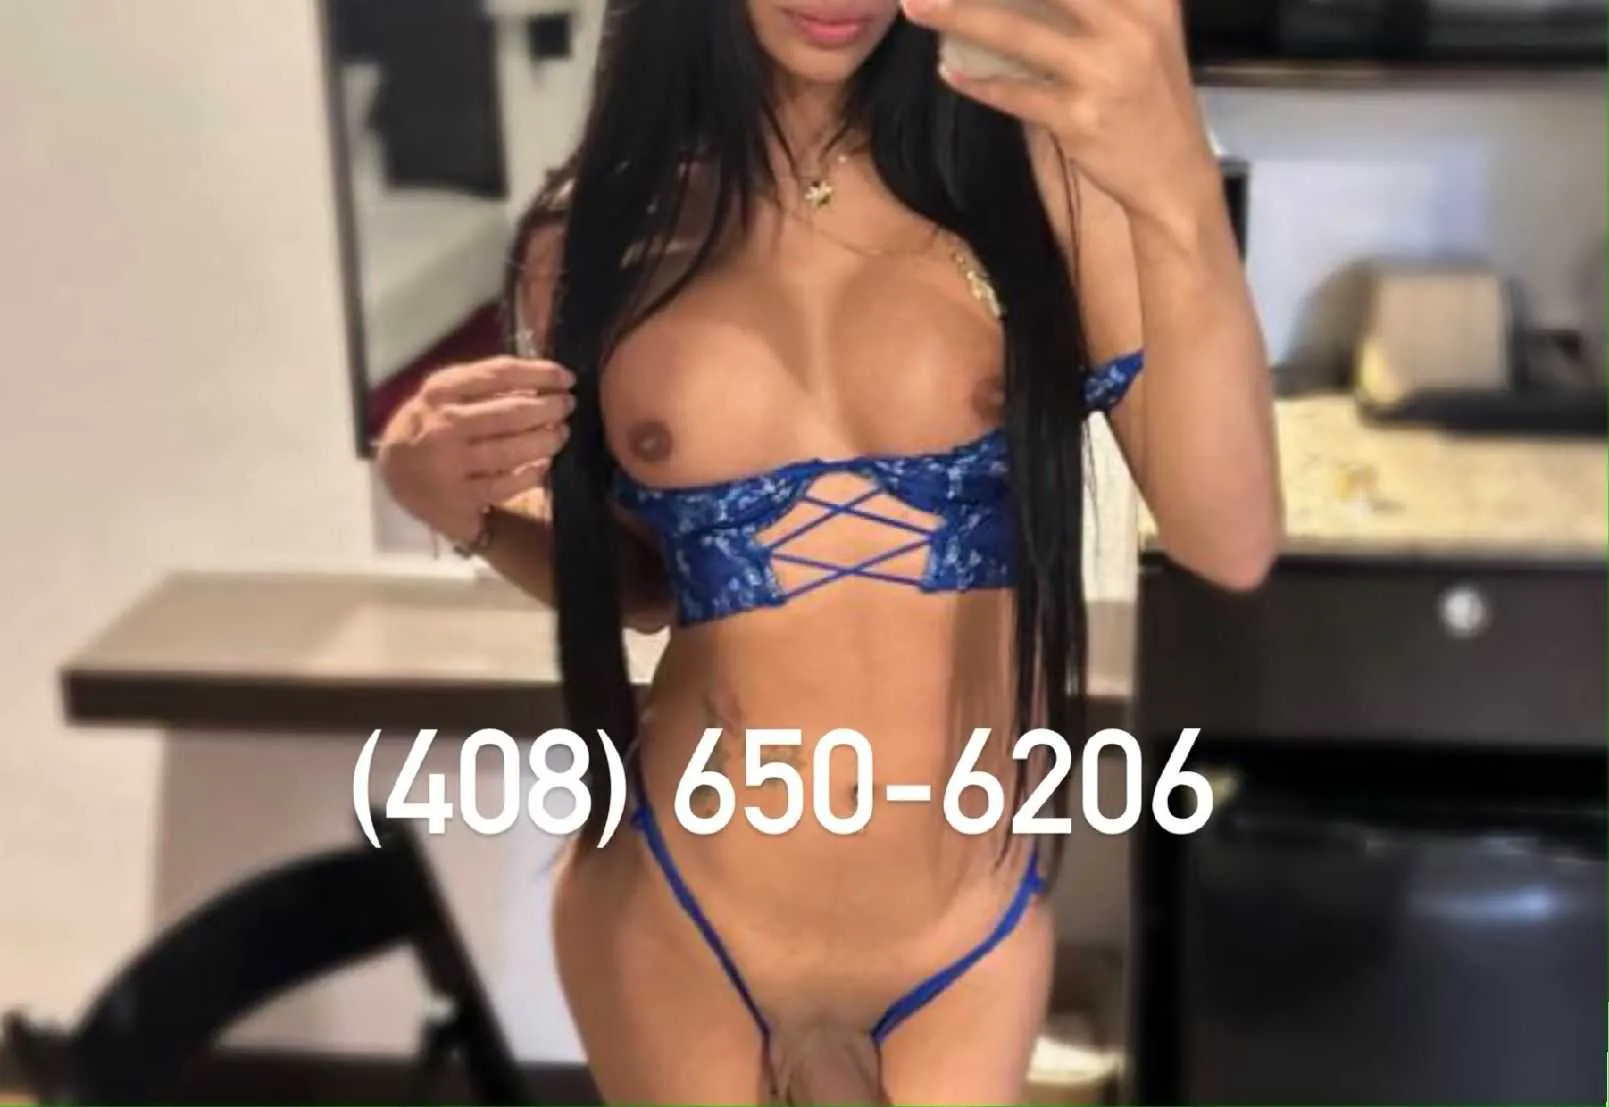 Reviews about escort with phone number 4086506206